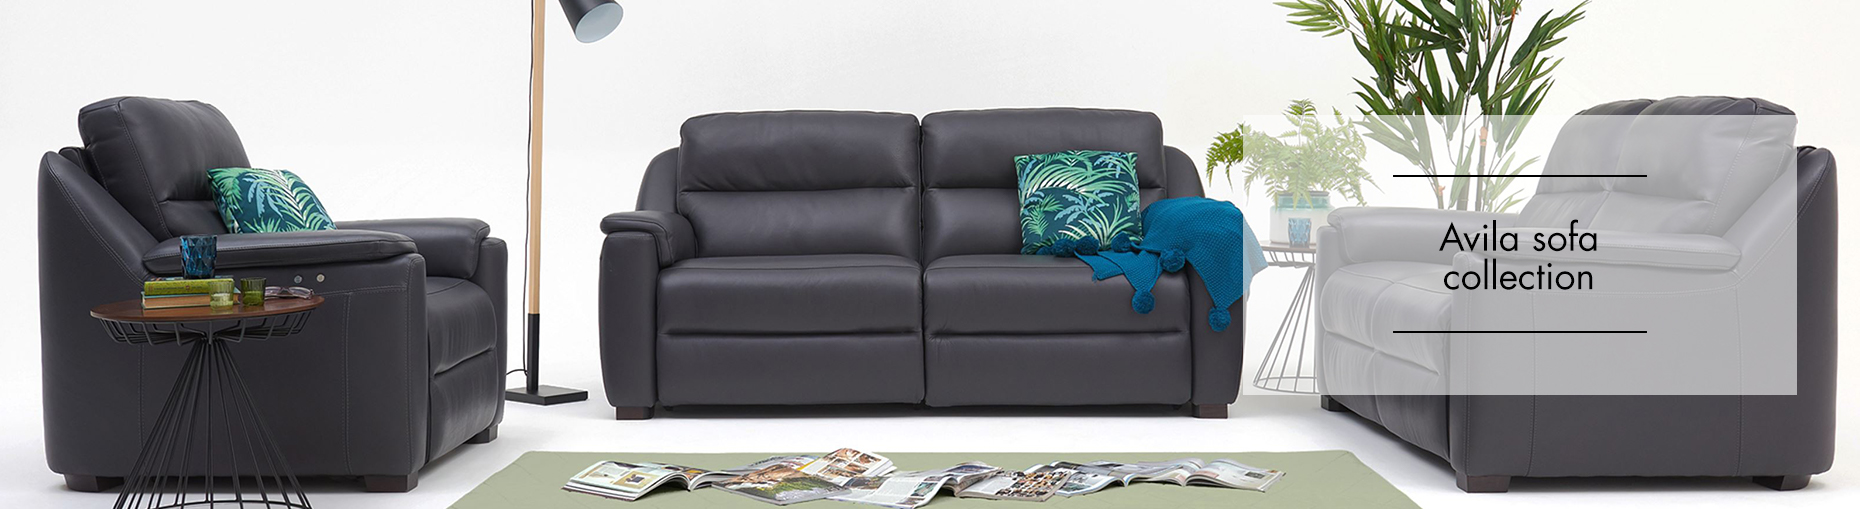 Avila Sofa Collection by at Forrest Furnishing